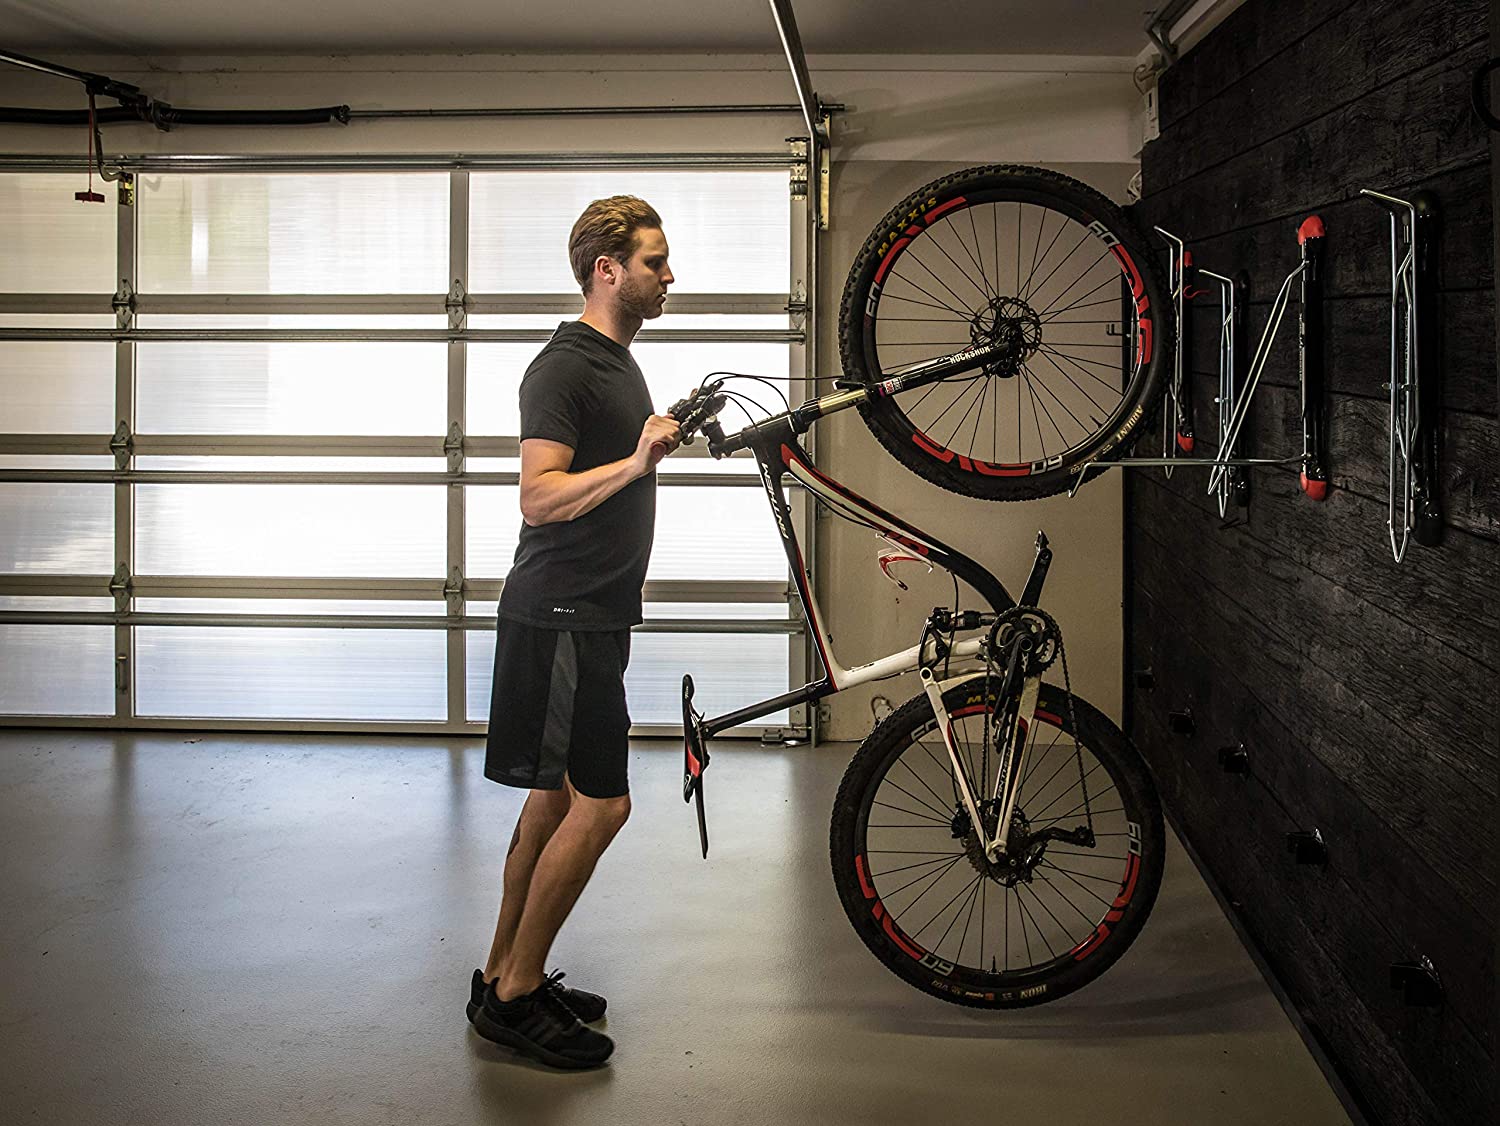 Looking to Buy The Best Folding Bike: 10 Key Features To Consider Before Buying a Portable Mountain Bike